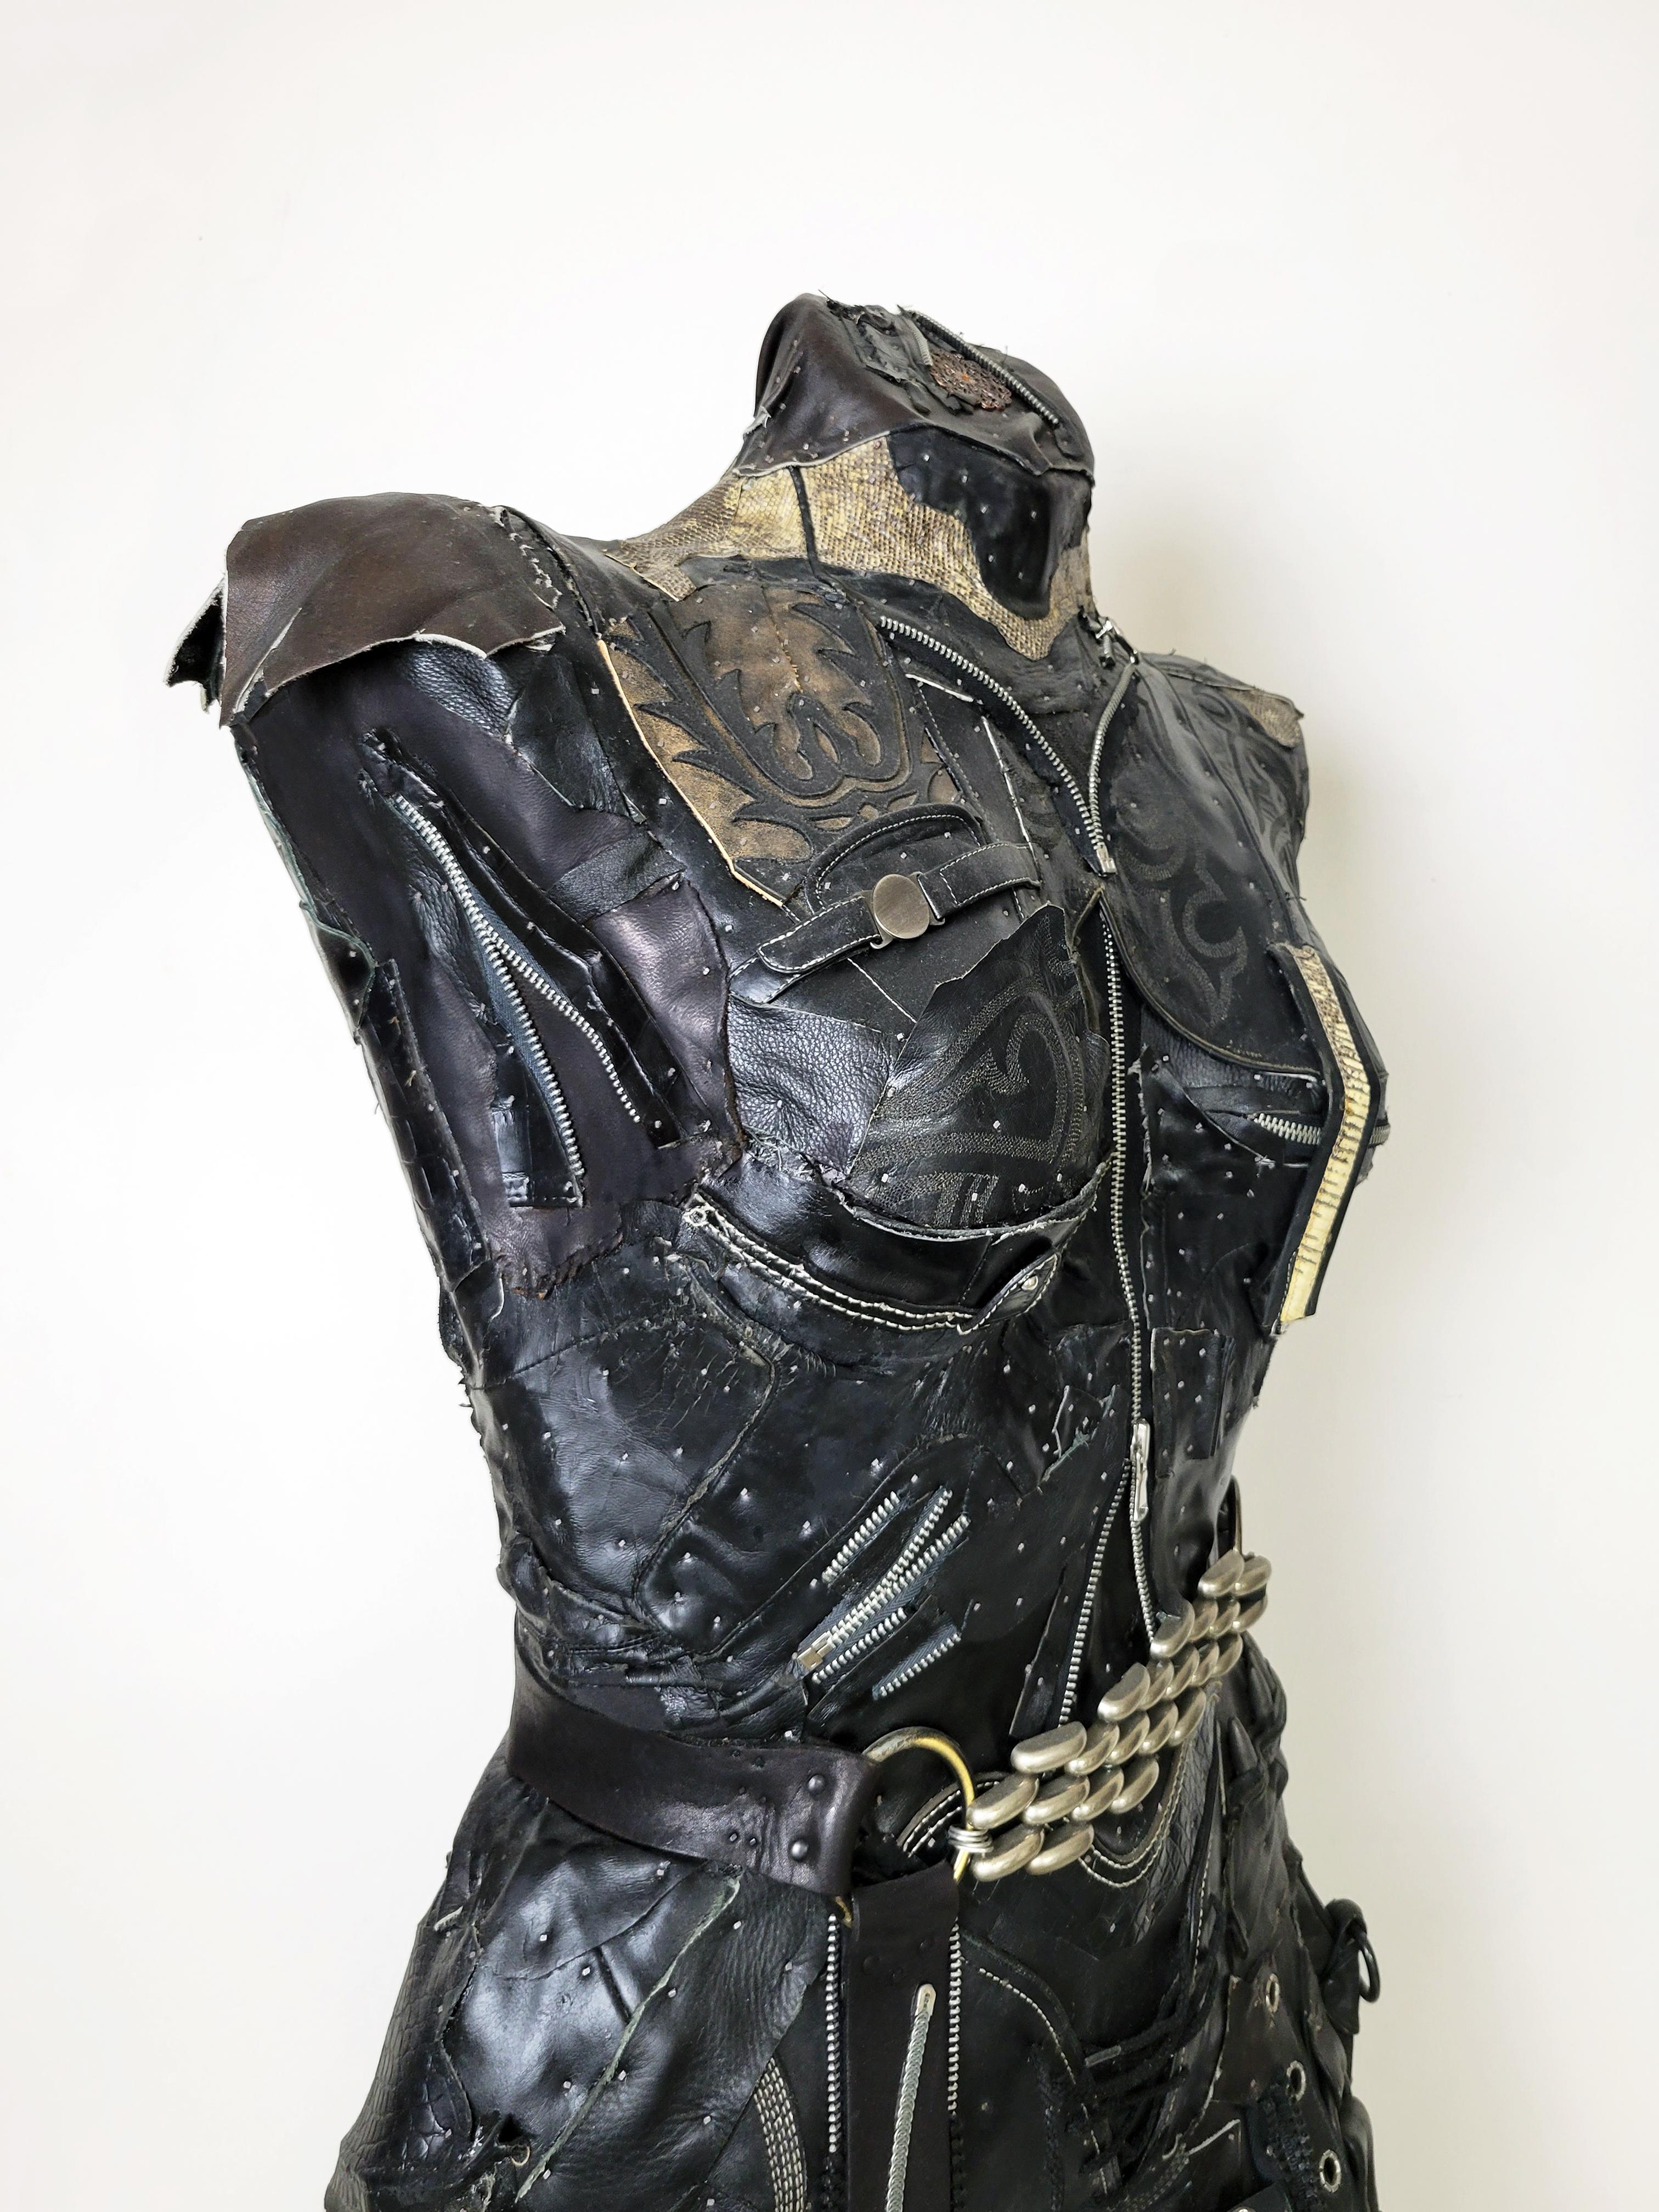 Feminist Contemporary Black Leather Metal Torso Sculpture - Need's Answer 741  - Gray Figurative Sculpture by Linda Stein